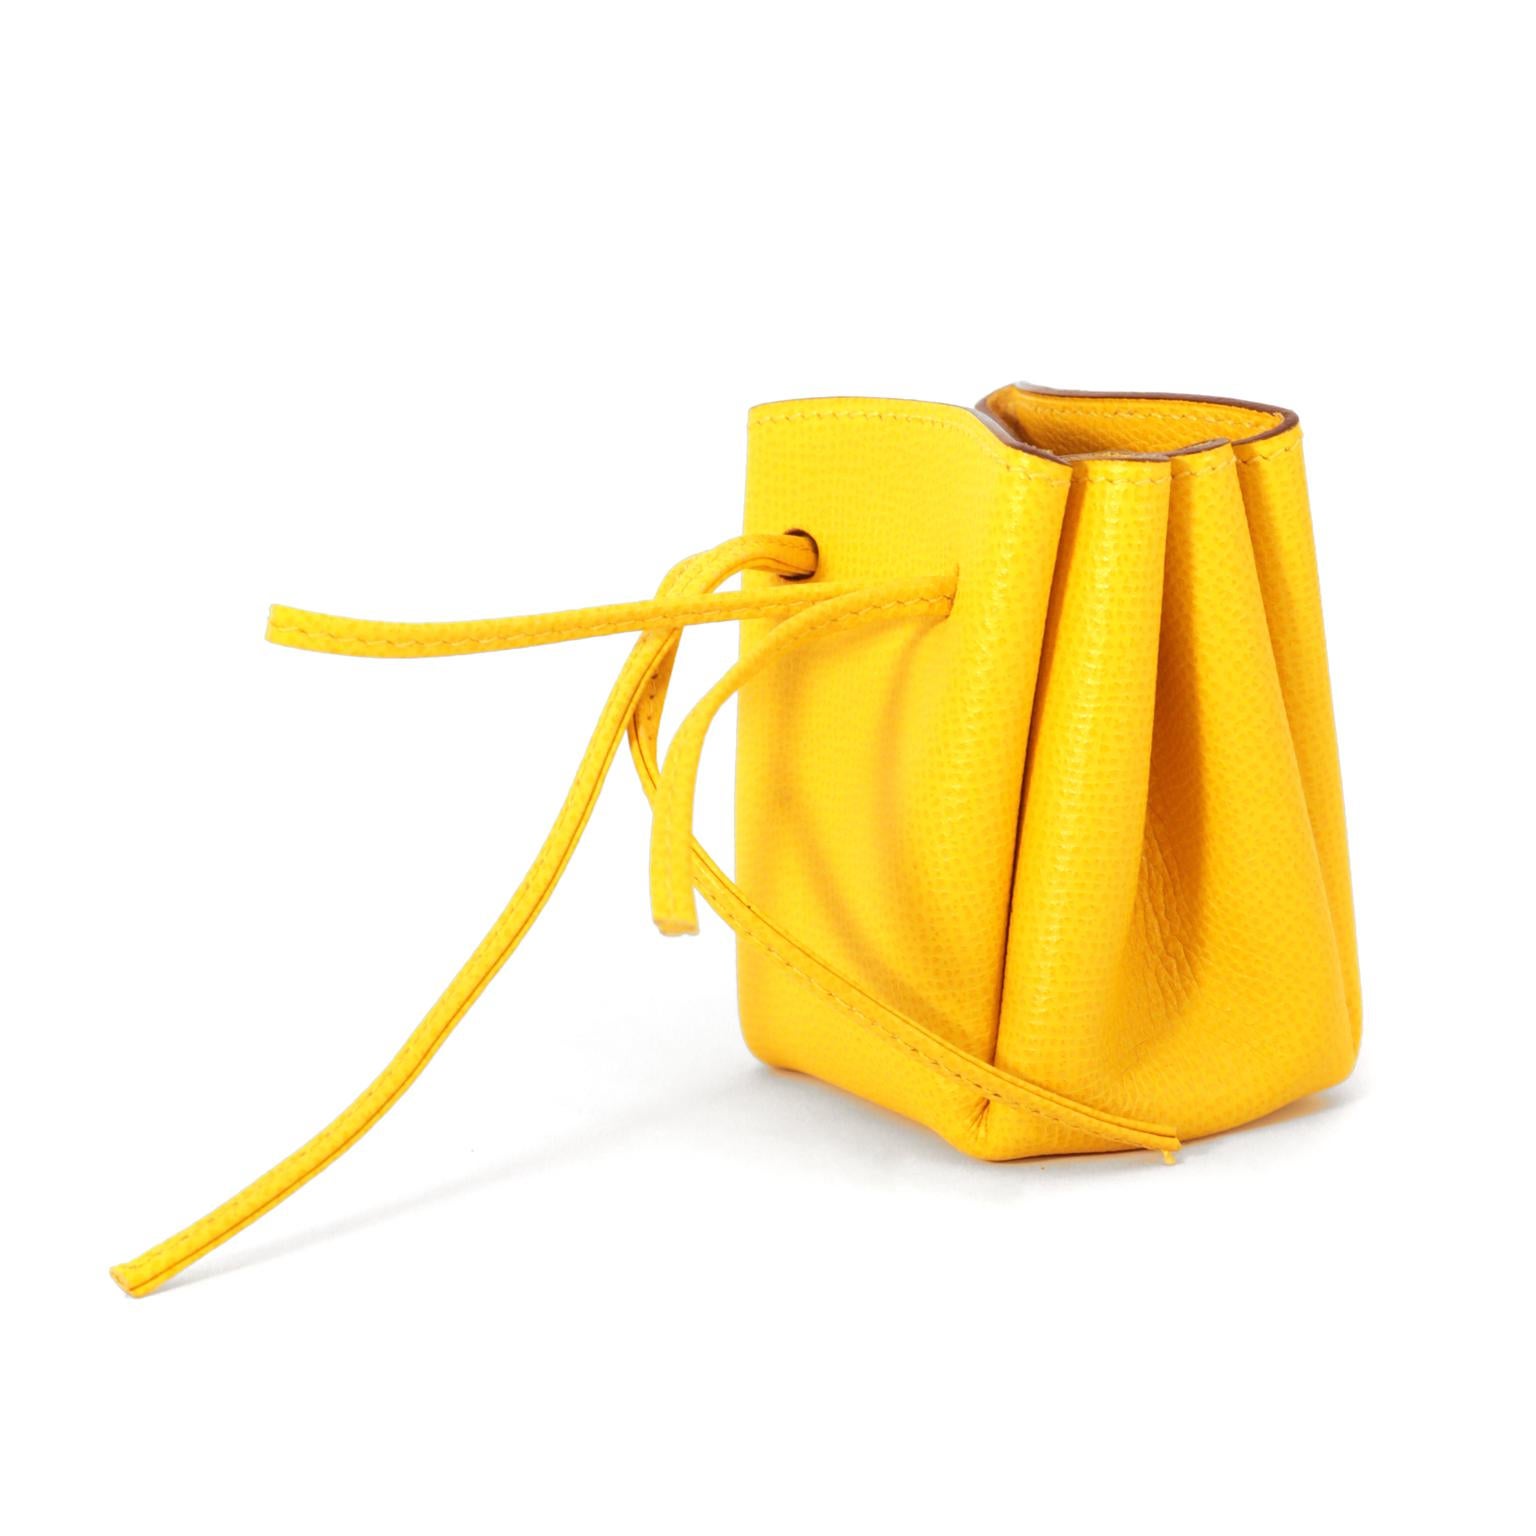 This authentic Hermès Yellow Epsom Vespa Pouch is in pristine condition.  Adorably dangles from a bag or tossed inside, this cheerful little accessory is a great gift.  Made in France.

Measurements:  3.5” x 3.75” x 2.25”  

PBF
